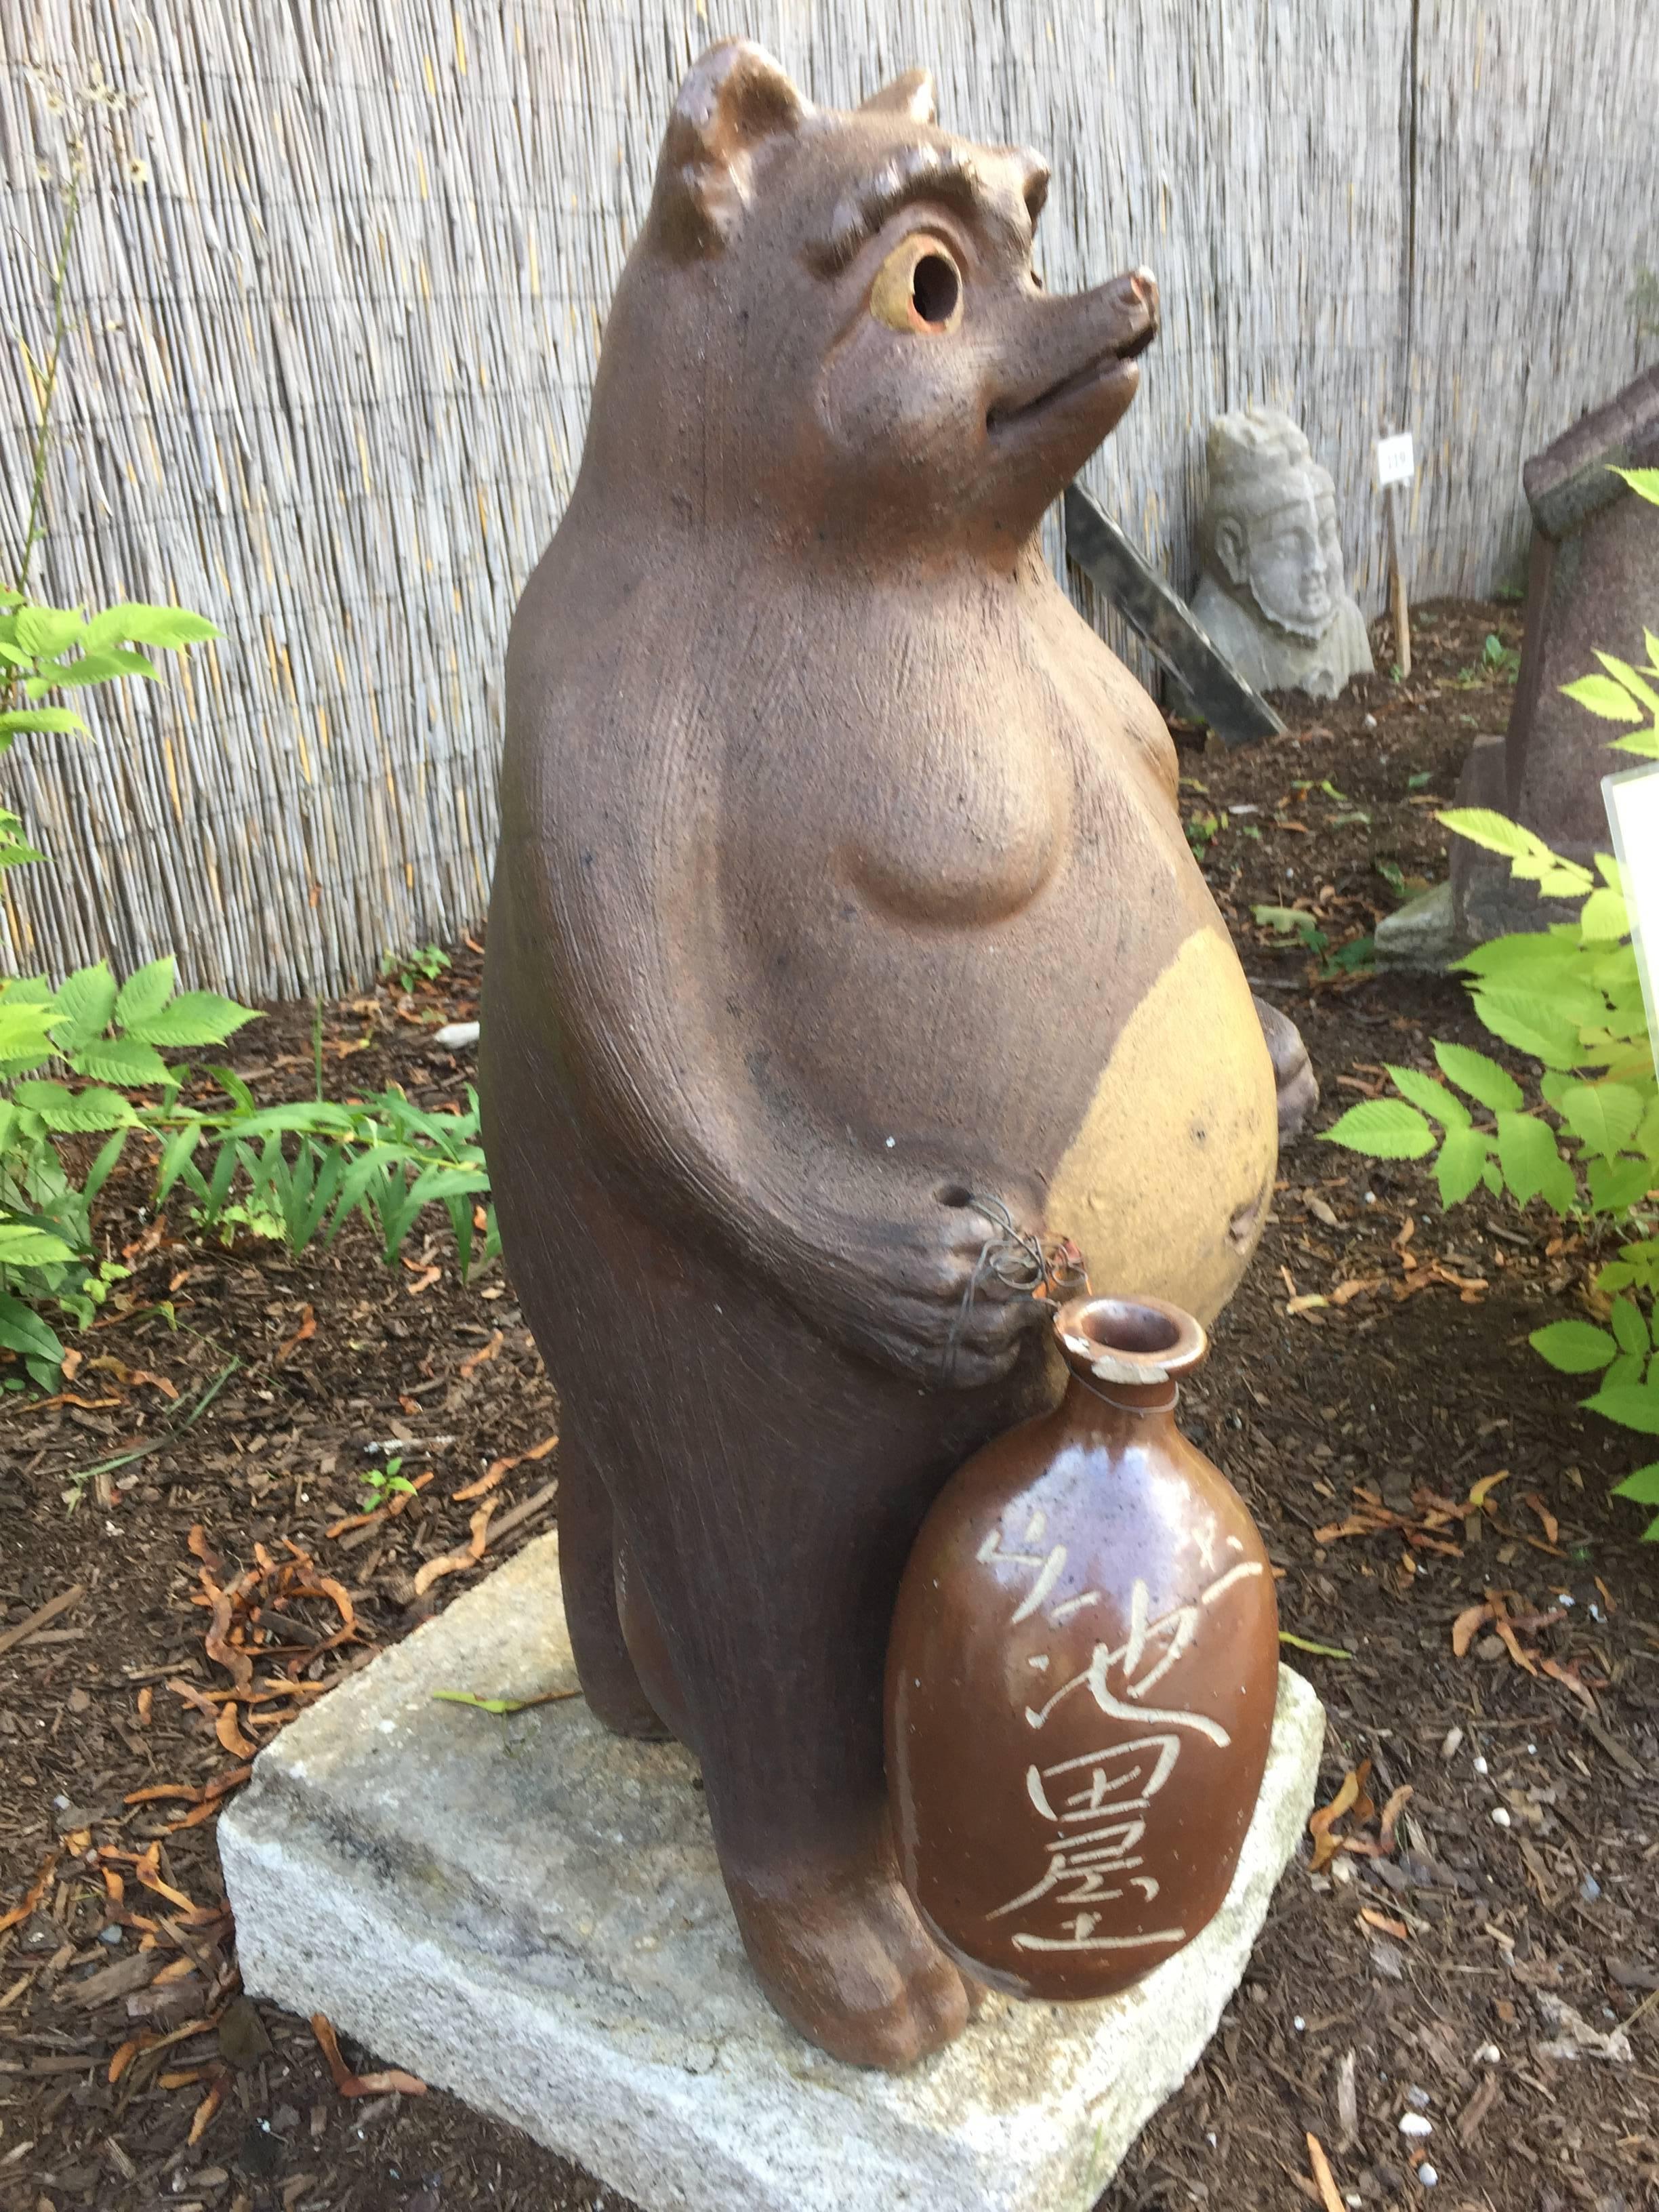 An old, large-scale, and big bellied Folk art Hero Tanuki- raccoon dog party animal from Japan, glazed pottery.

Dimensions:  38 inches high

Quality: Fine quality and hecarries a 19th century sake pottery bottle which is included. Now hard to find